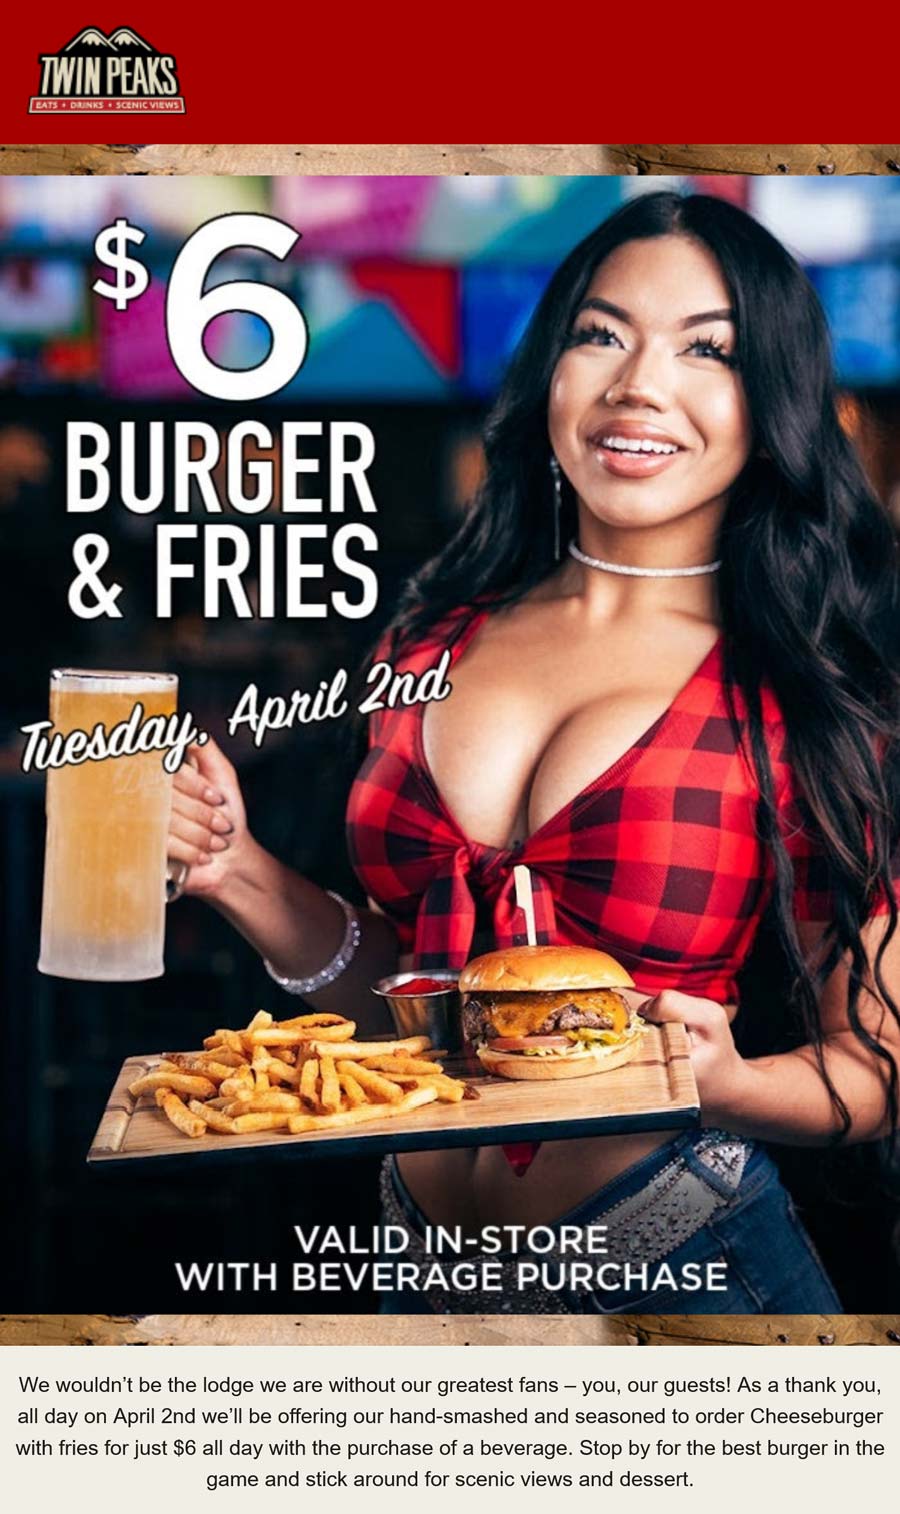 Twin Peaks restaurants Coupon  Cheeseburger + fries = $6 with your beverage Tuesday at Twin Peaks #twinpeaks 